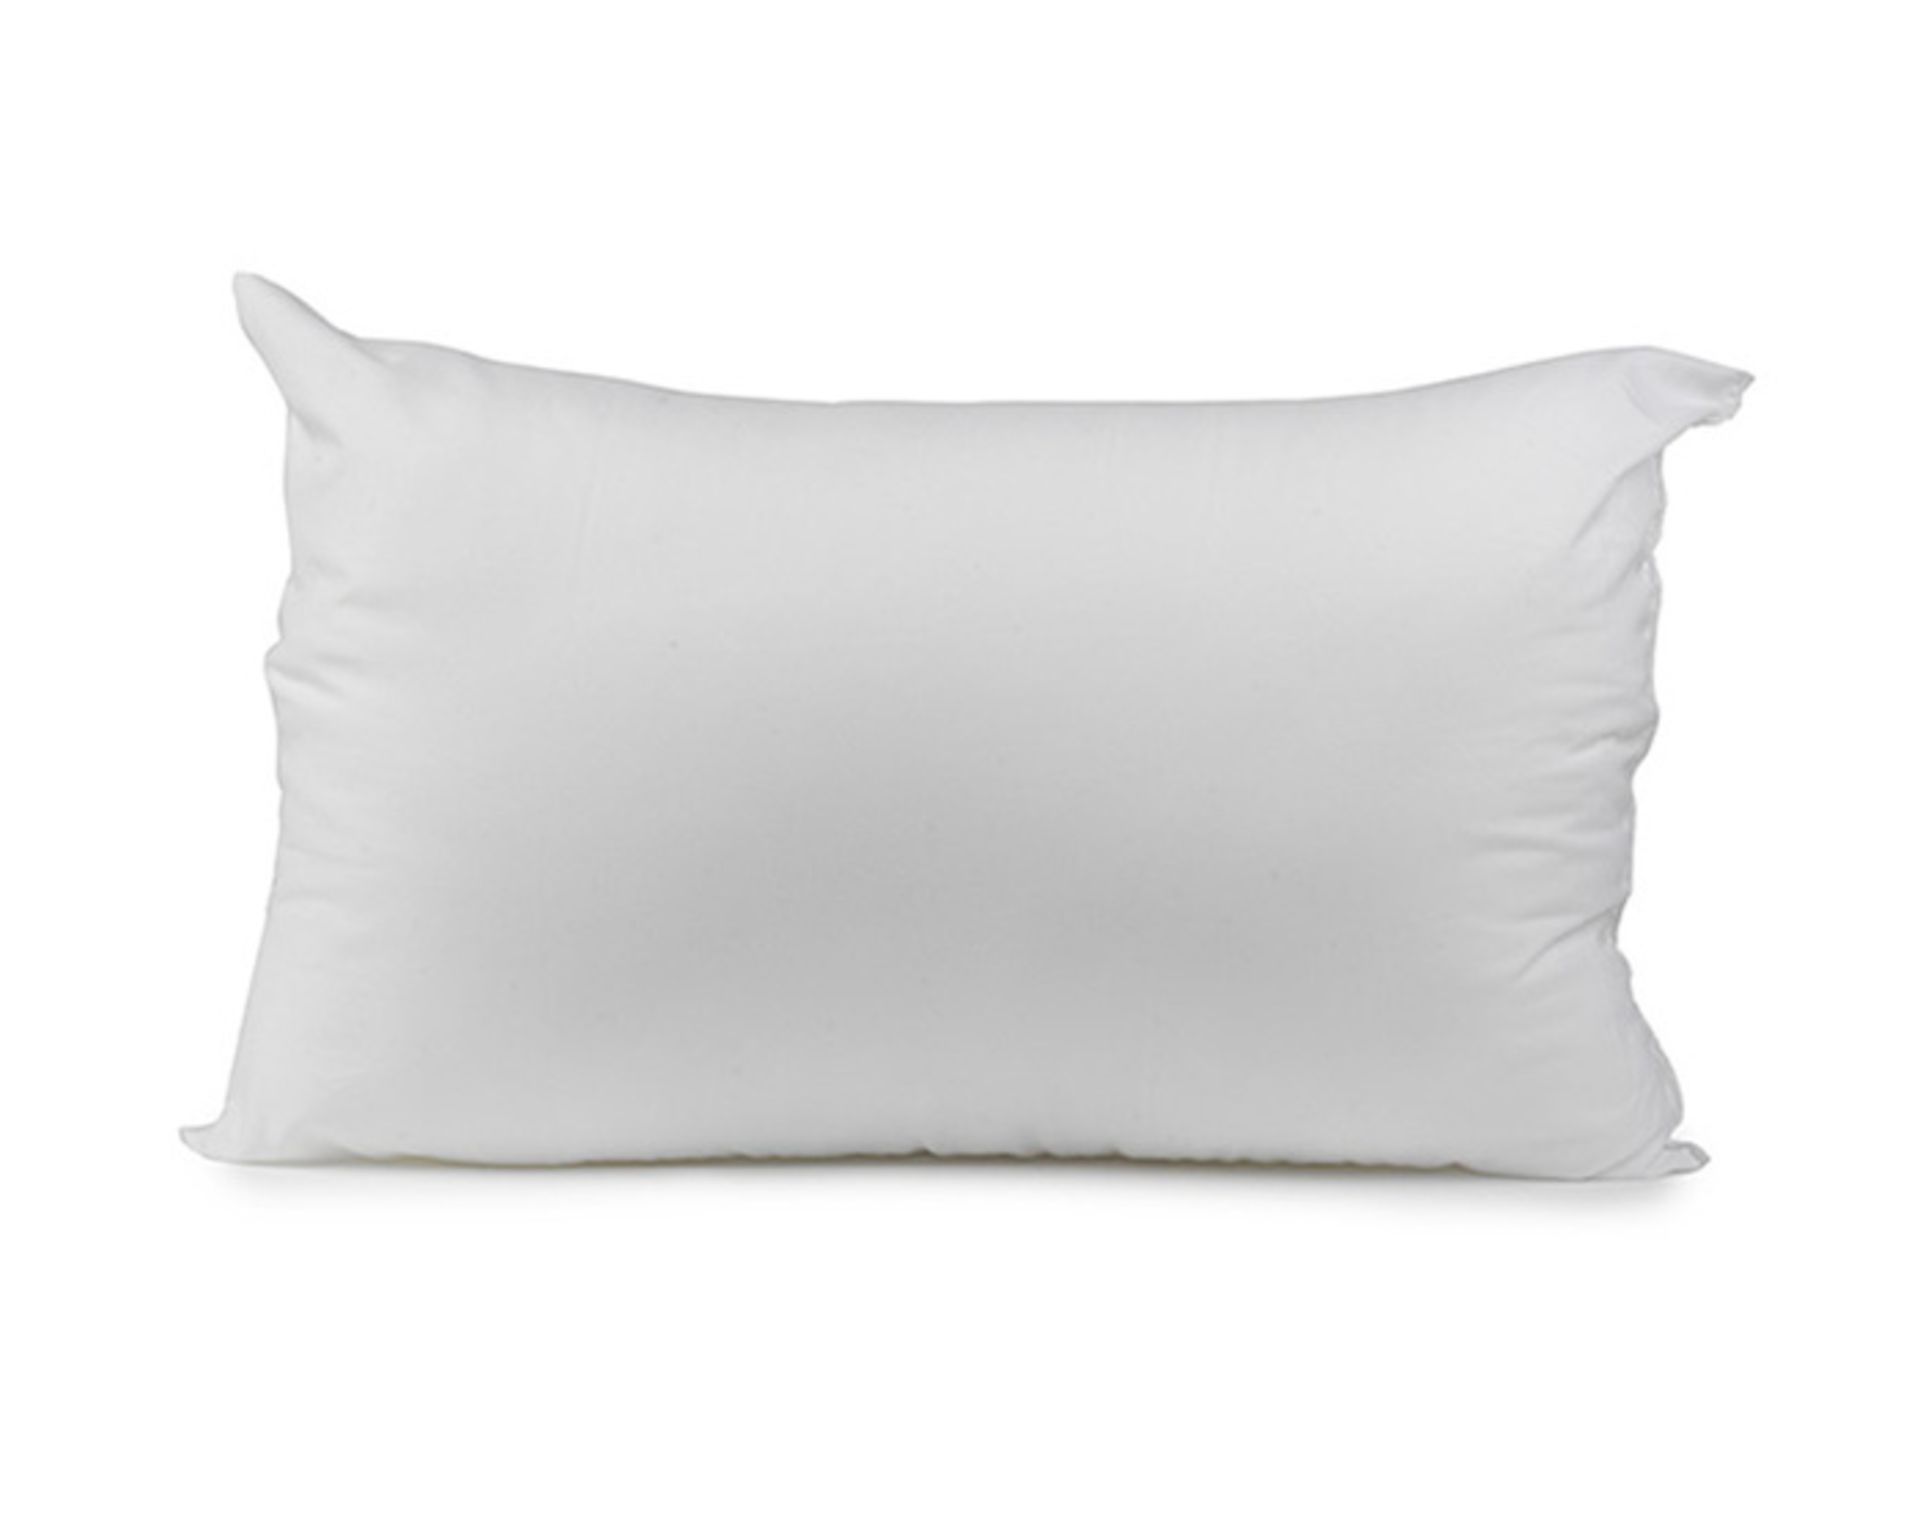 V *TRADE QTY* Brand New Twin Pack Luxury Pillows With Down-Like Filling & Super-Soft Cover.